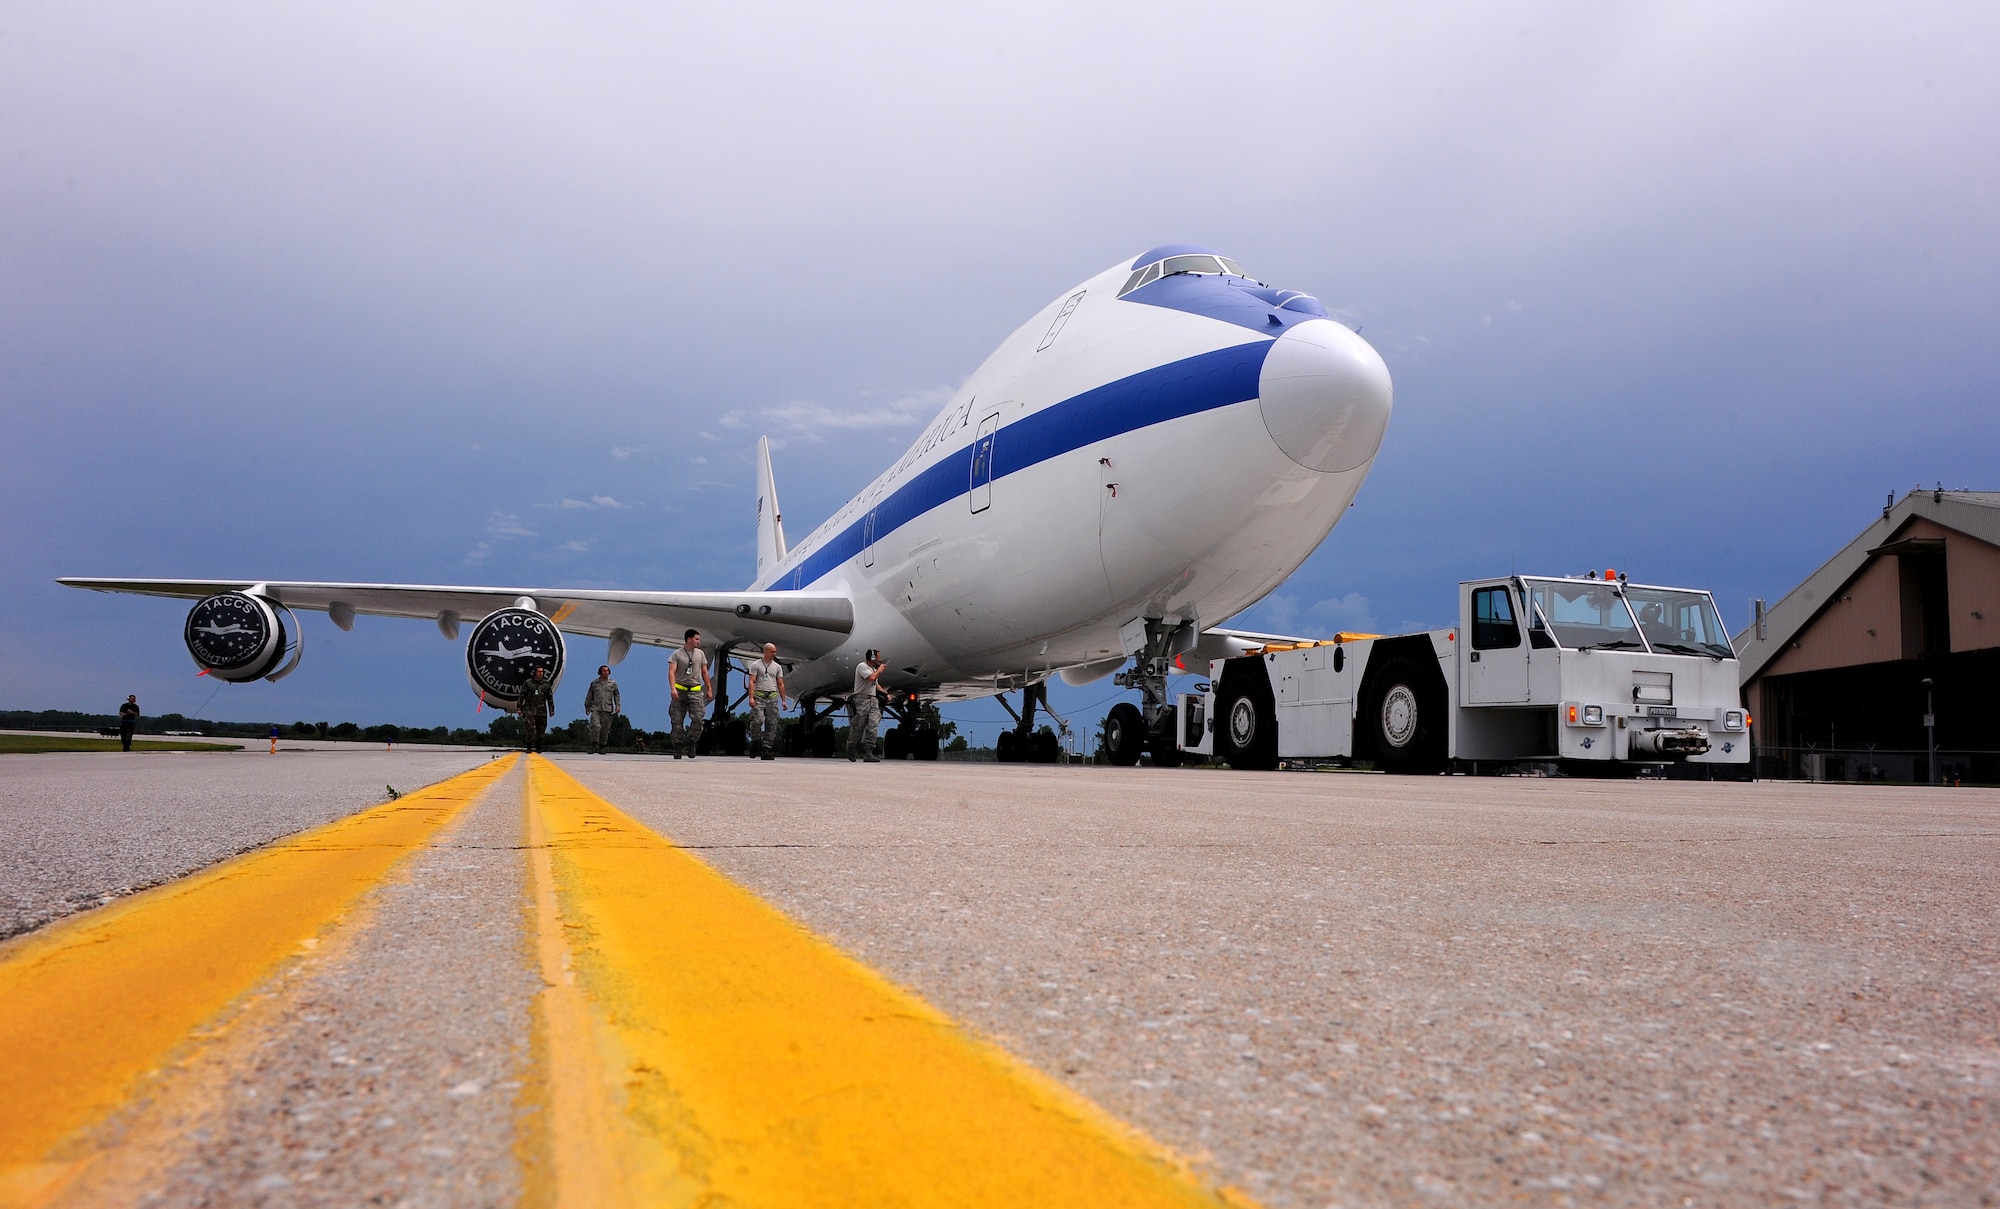 OFFUTT AIR FORCE BASE Neb.,-- An E-4B aircraft an emergency mobile command and control center, is towed out of it's hangar at the east end of Offutt's runway June 17. The E-4B serves as the National Airborne Operations Center for the president,  secretary of defense and the Joint Chiefs of Staff. If needed, the E-4B can provide a command, control and communications center to direct U.S. forces, execute emergency war orders and coordinate actions by civil authorities. U.S. Air Force Photo by Josh Plueger
